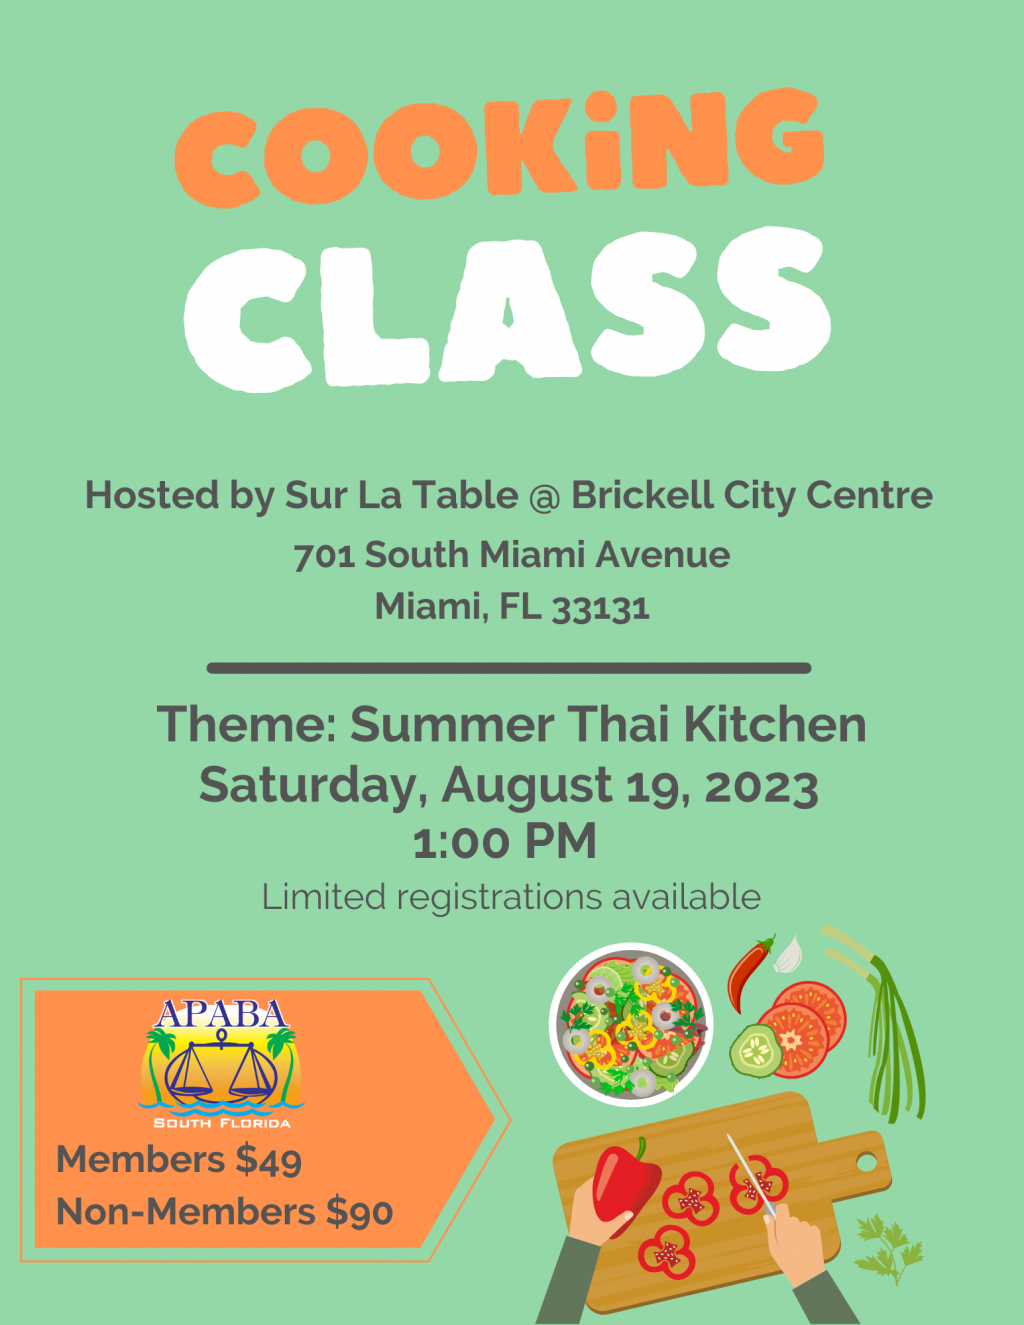 APABA Cooking Class: Hosted by Sur La Table